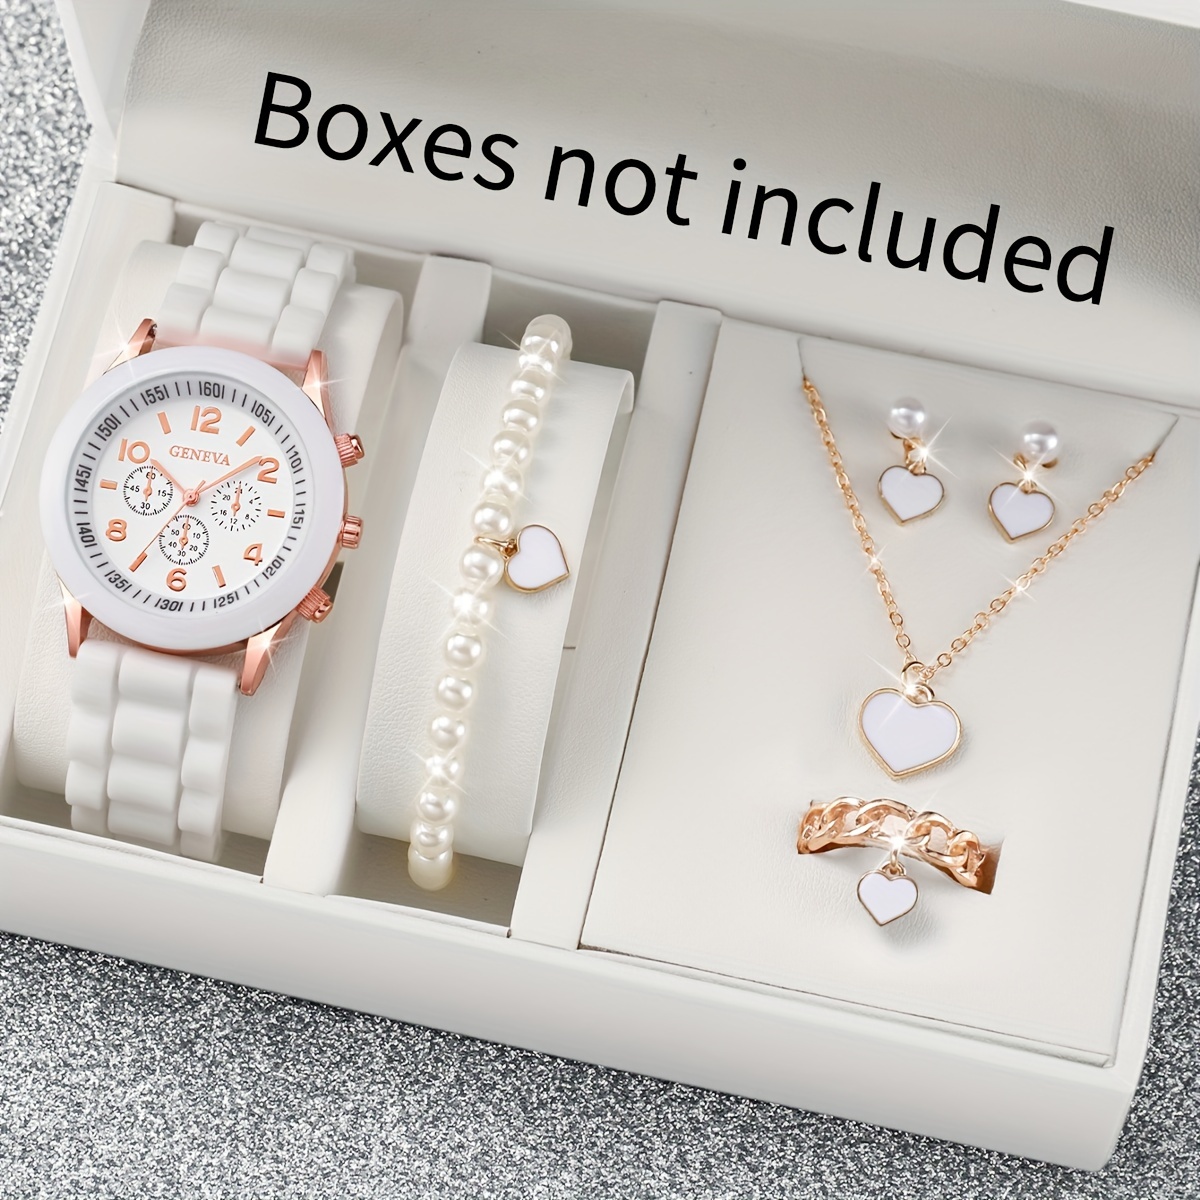 

6pcs/set Women's Casual Fashion Quartz Watch Analog Silicone Wrist Watch & Faux Pearl Heart Jewelry Set, Valentines Gift For Her